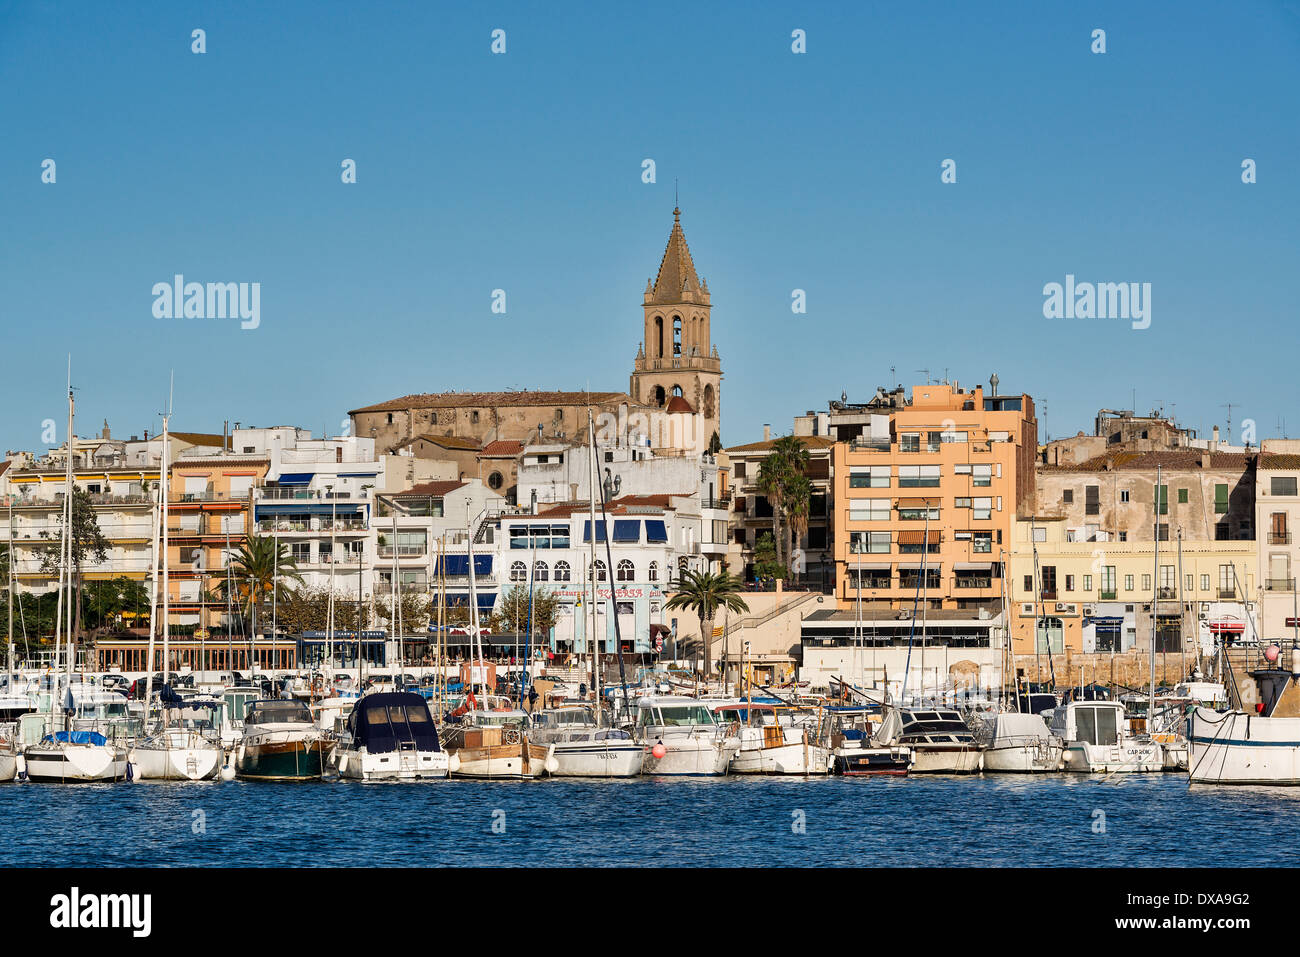 Overview of the harbor town of Palamos, Spain Stock Photo